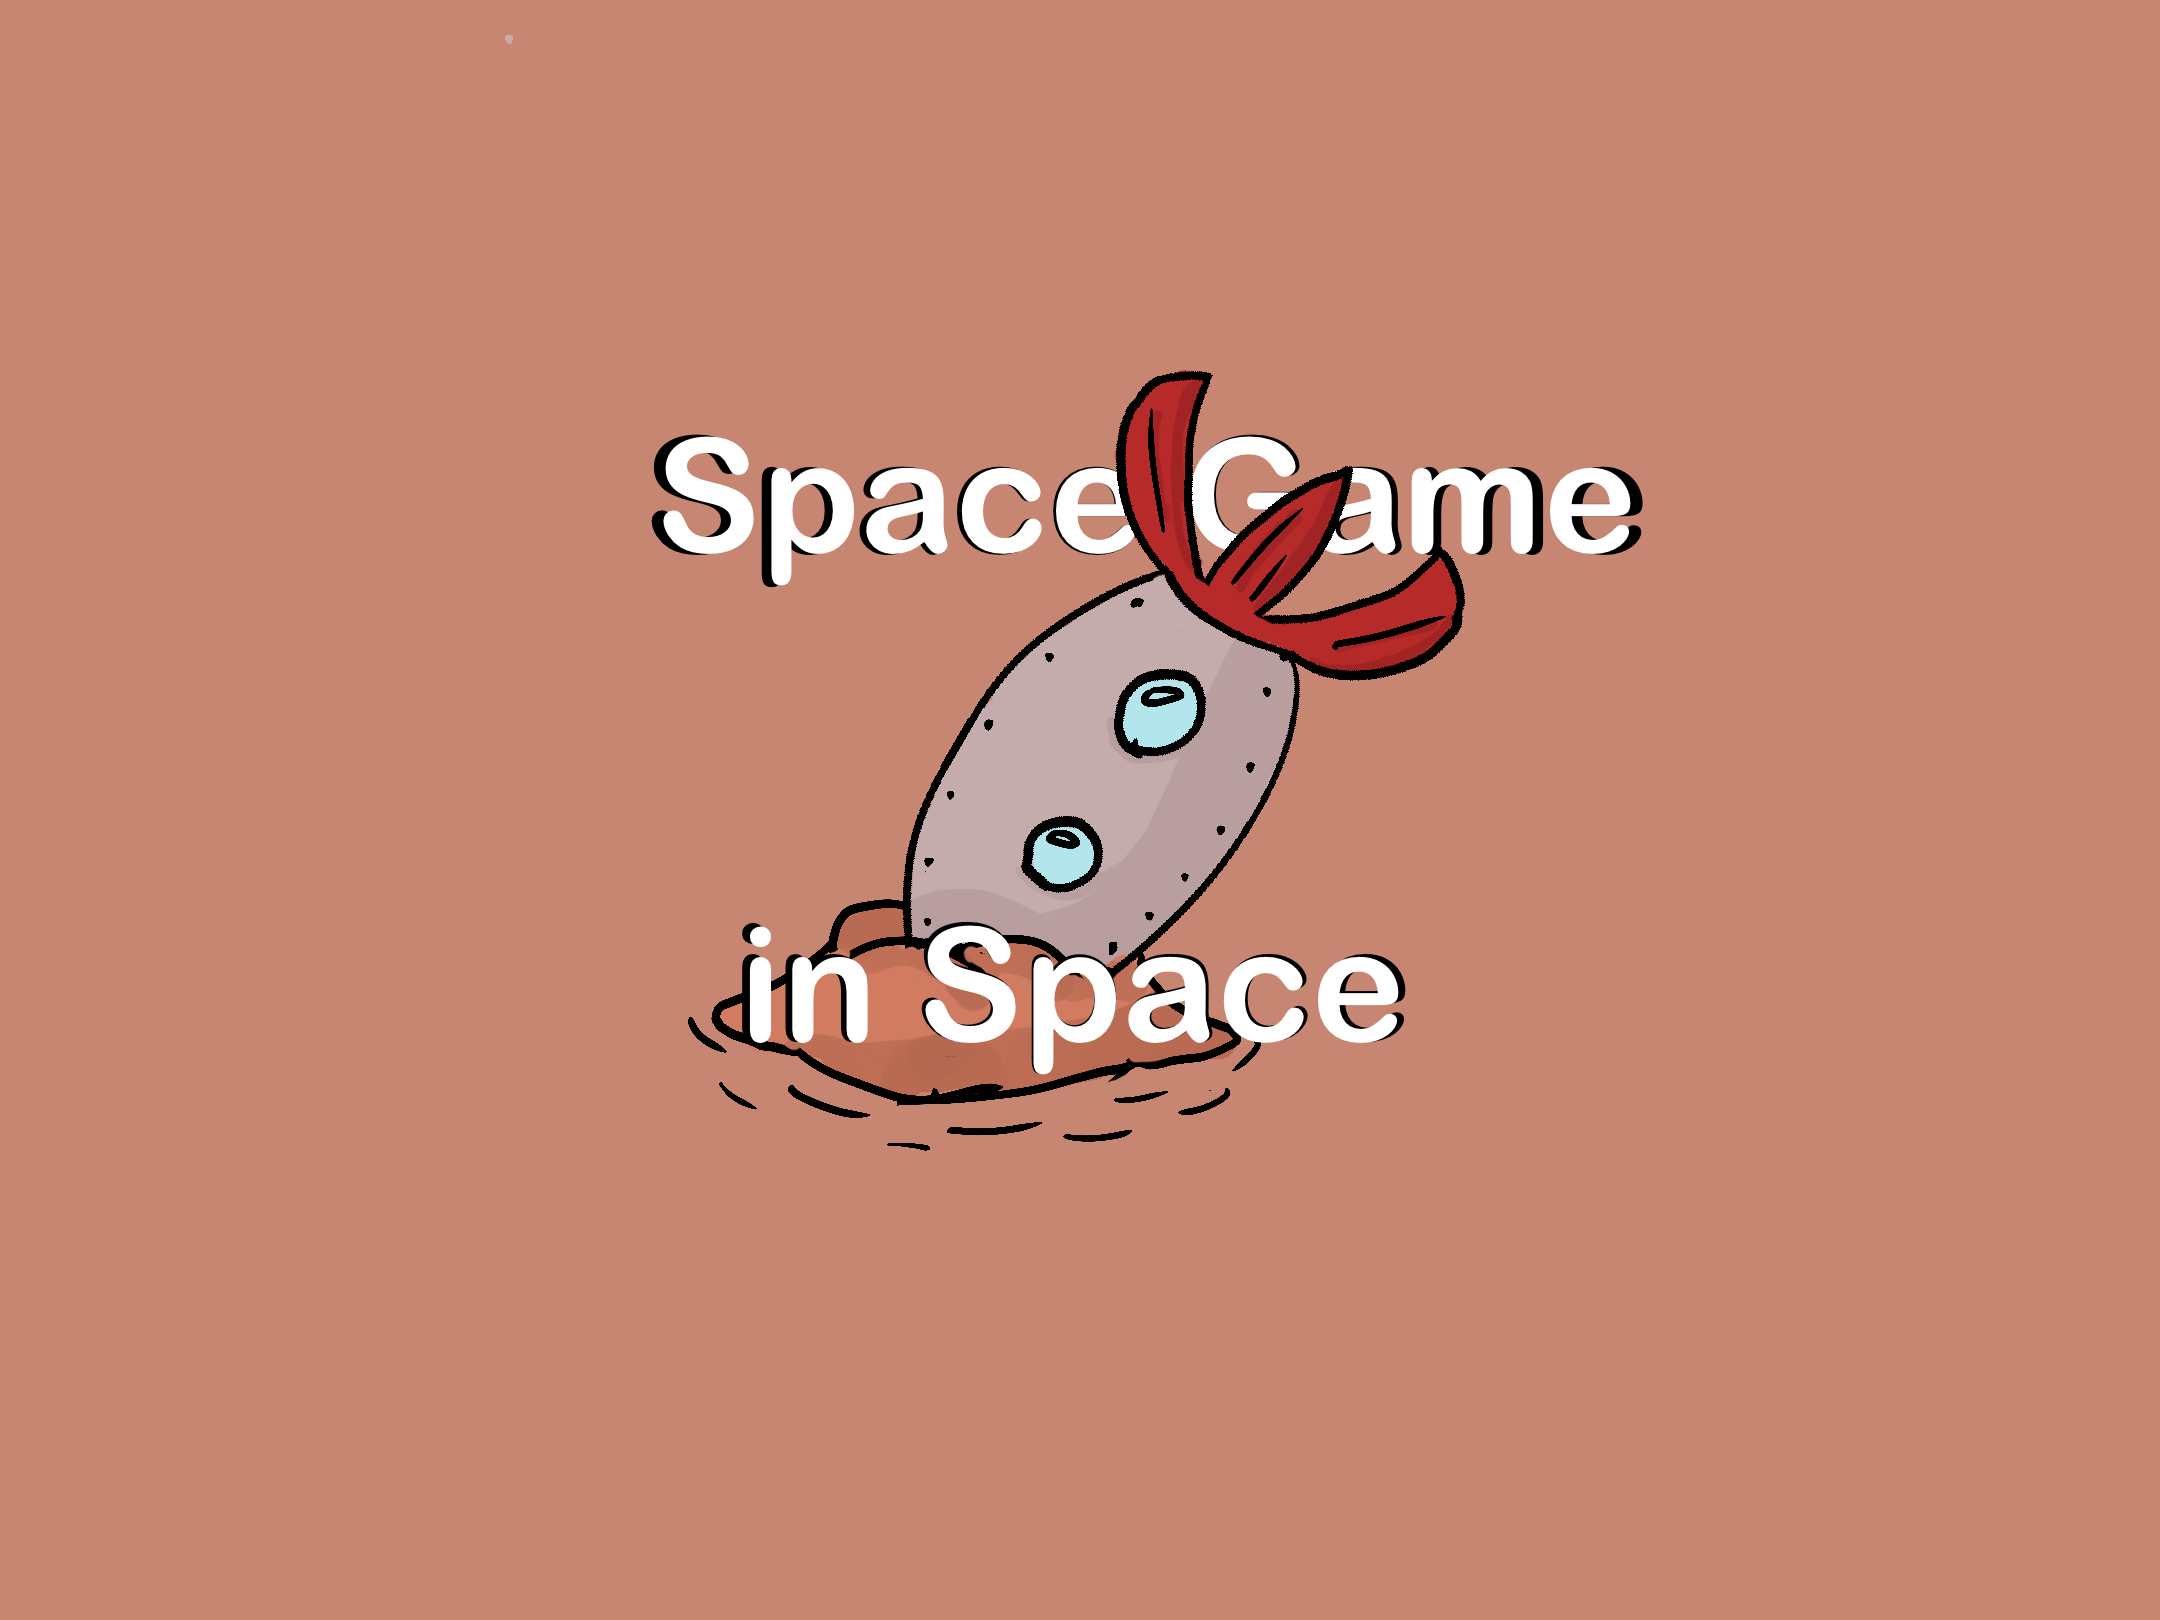 Space Game in Space